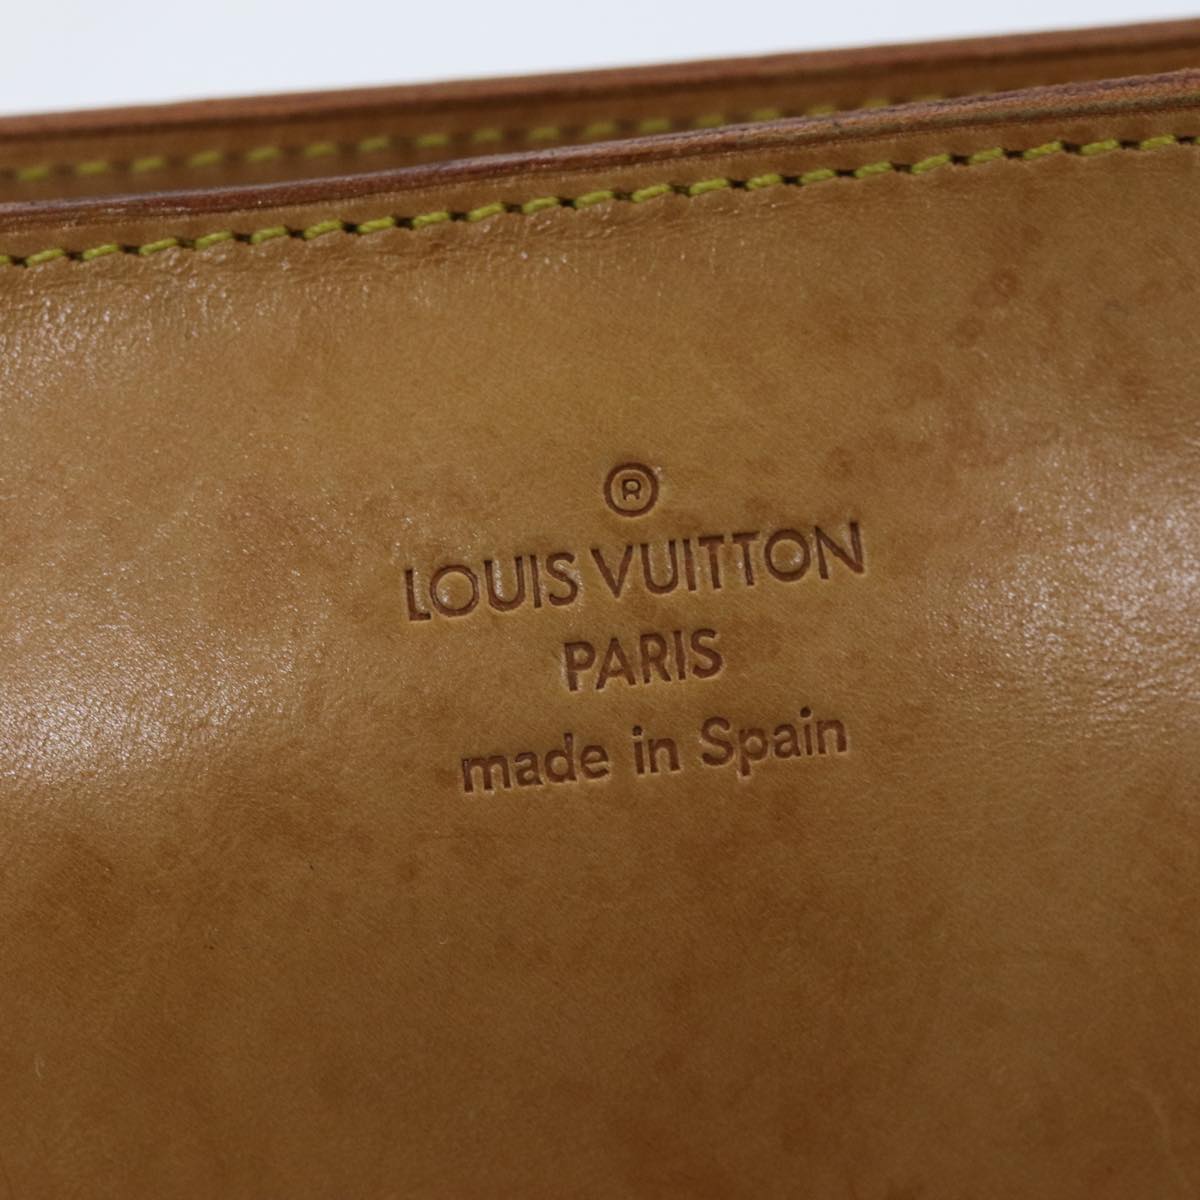 LOUIS VUITTON Nomad Accessory Pouch Leather Beige LV Auth bs14705